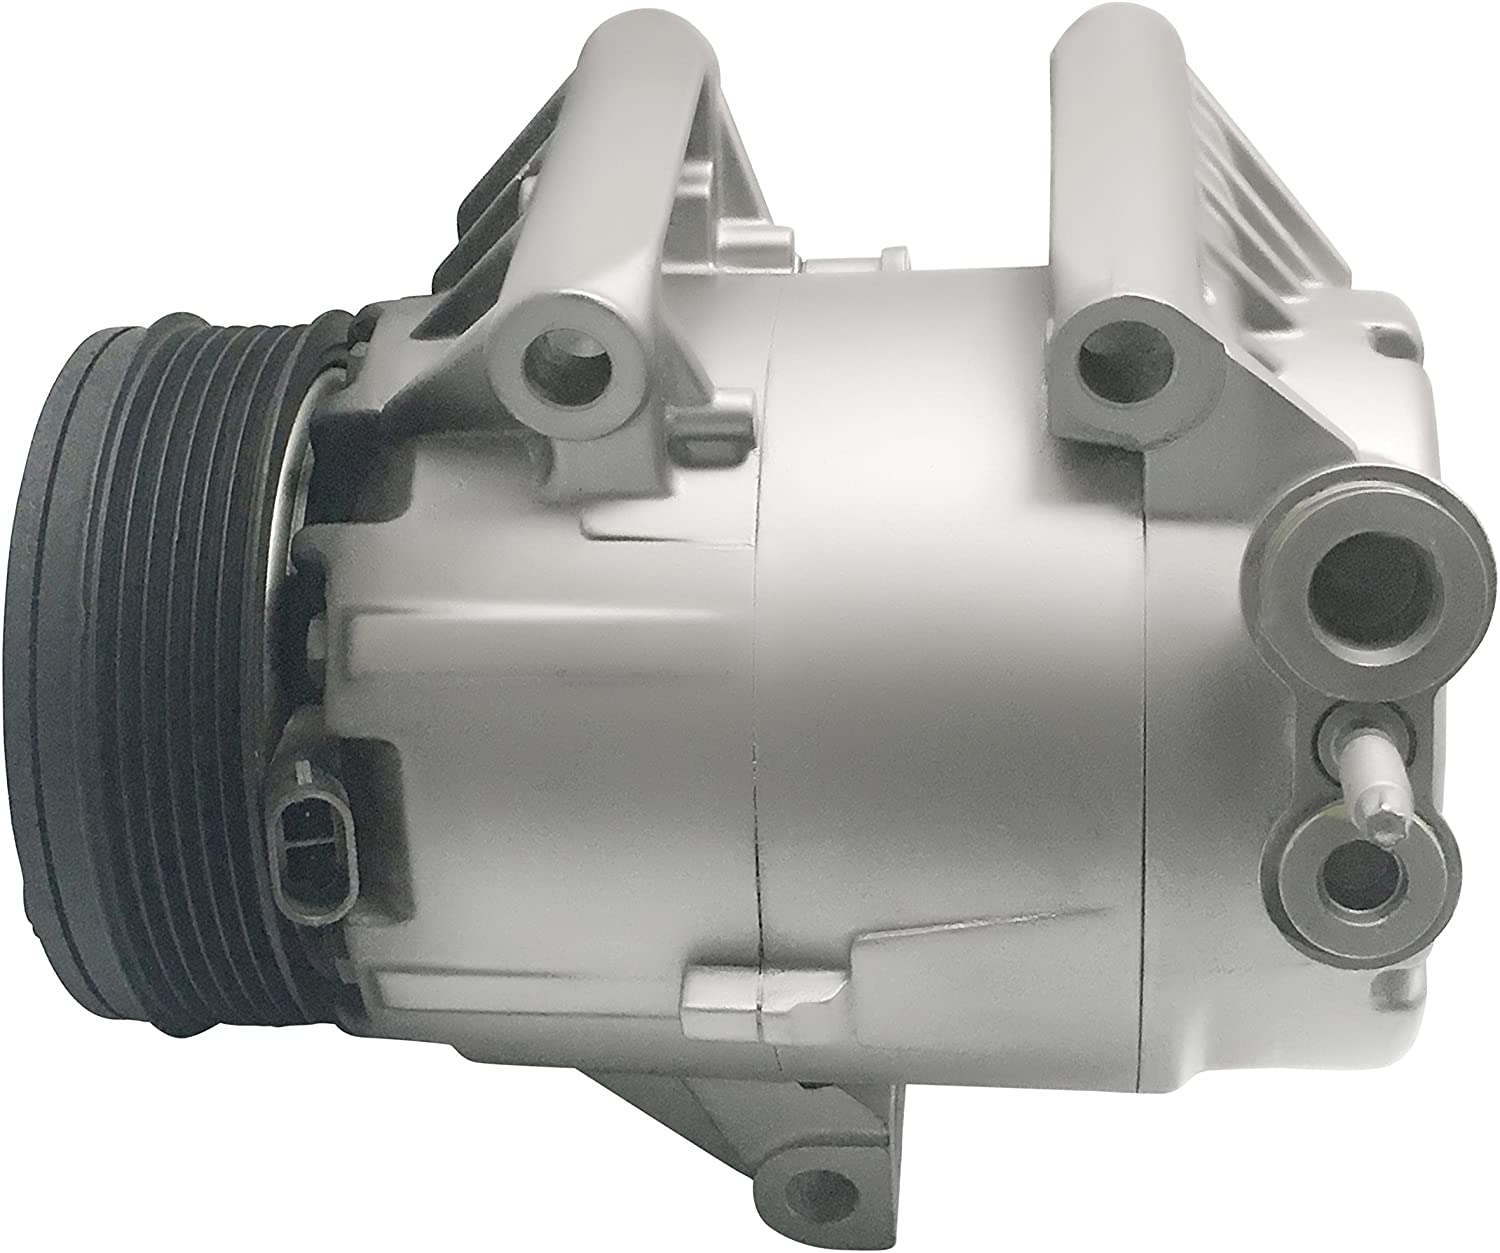 RYC Remanufactured AC Compressor and A/C Clutch FG239 (2004-2005 Chevy Impala and Monte Carlo Only)